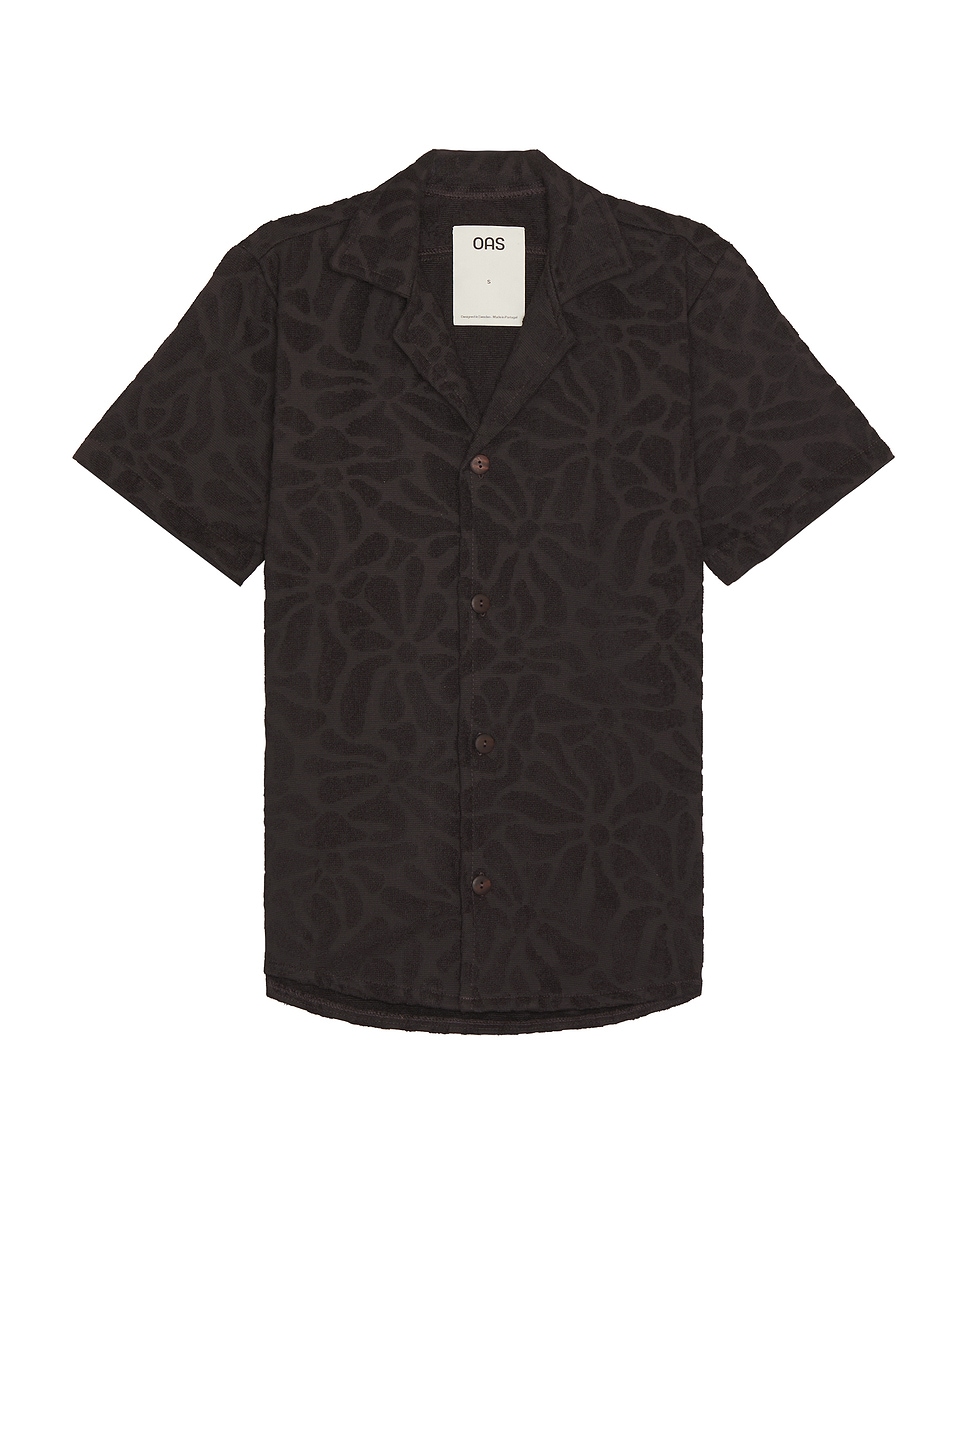 Blossom Cuba Terry Shirt in Chocolate